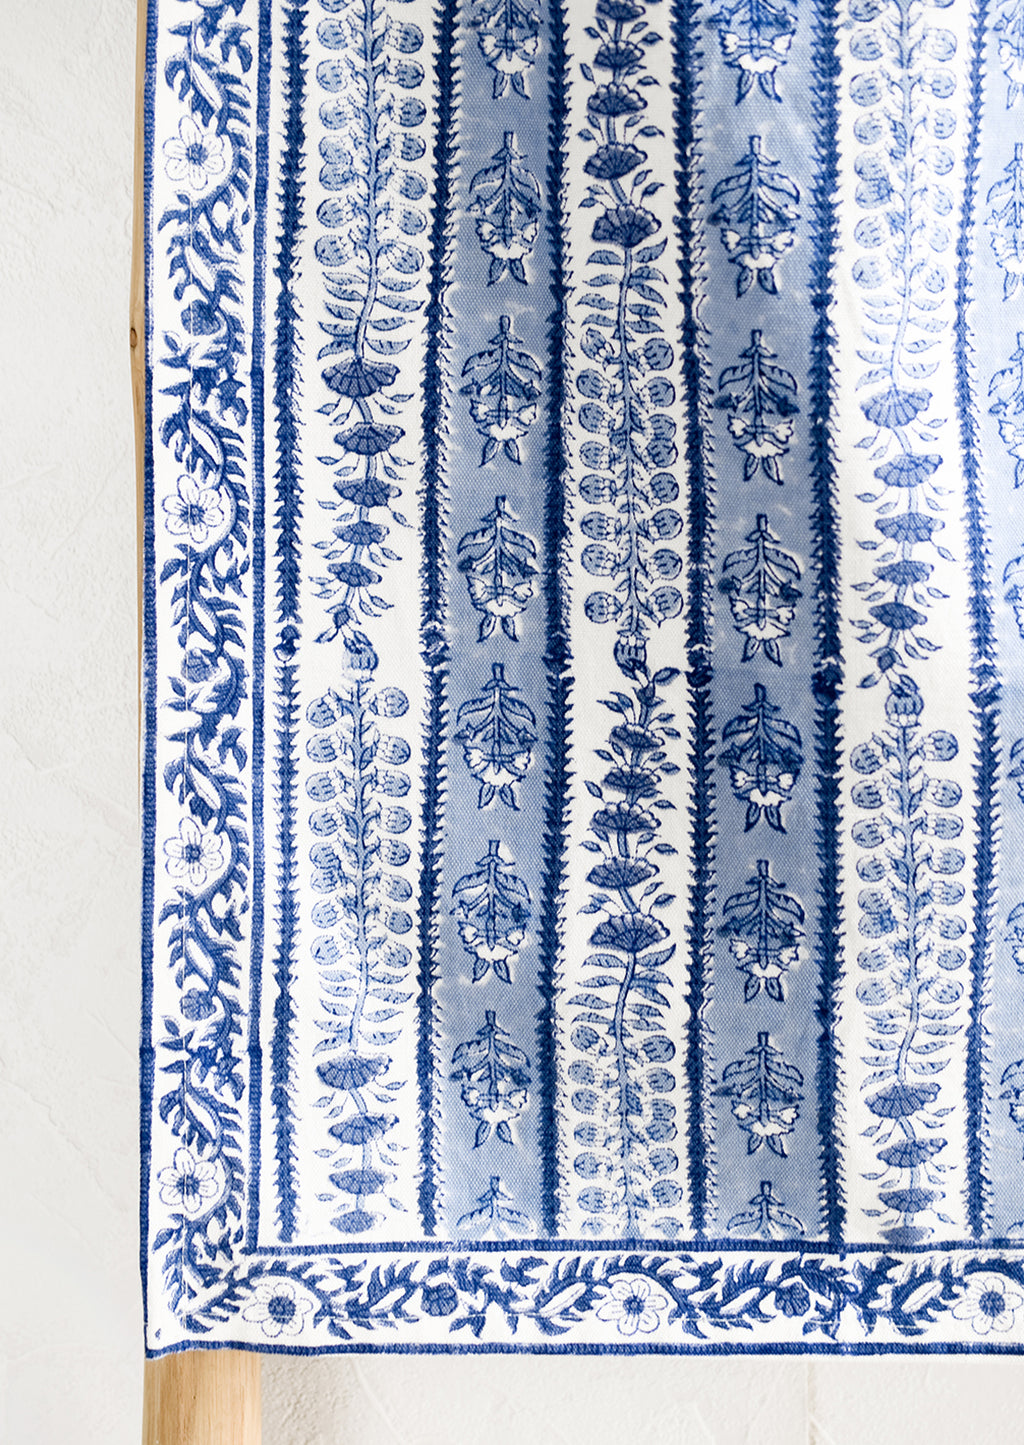 5: A stripe floral print table runner in blue and white.